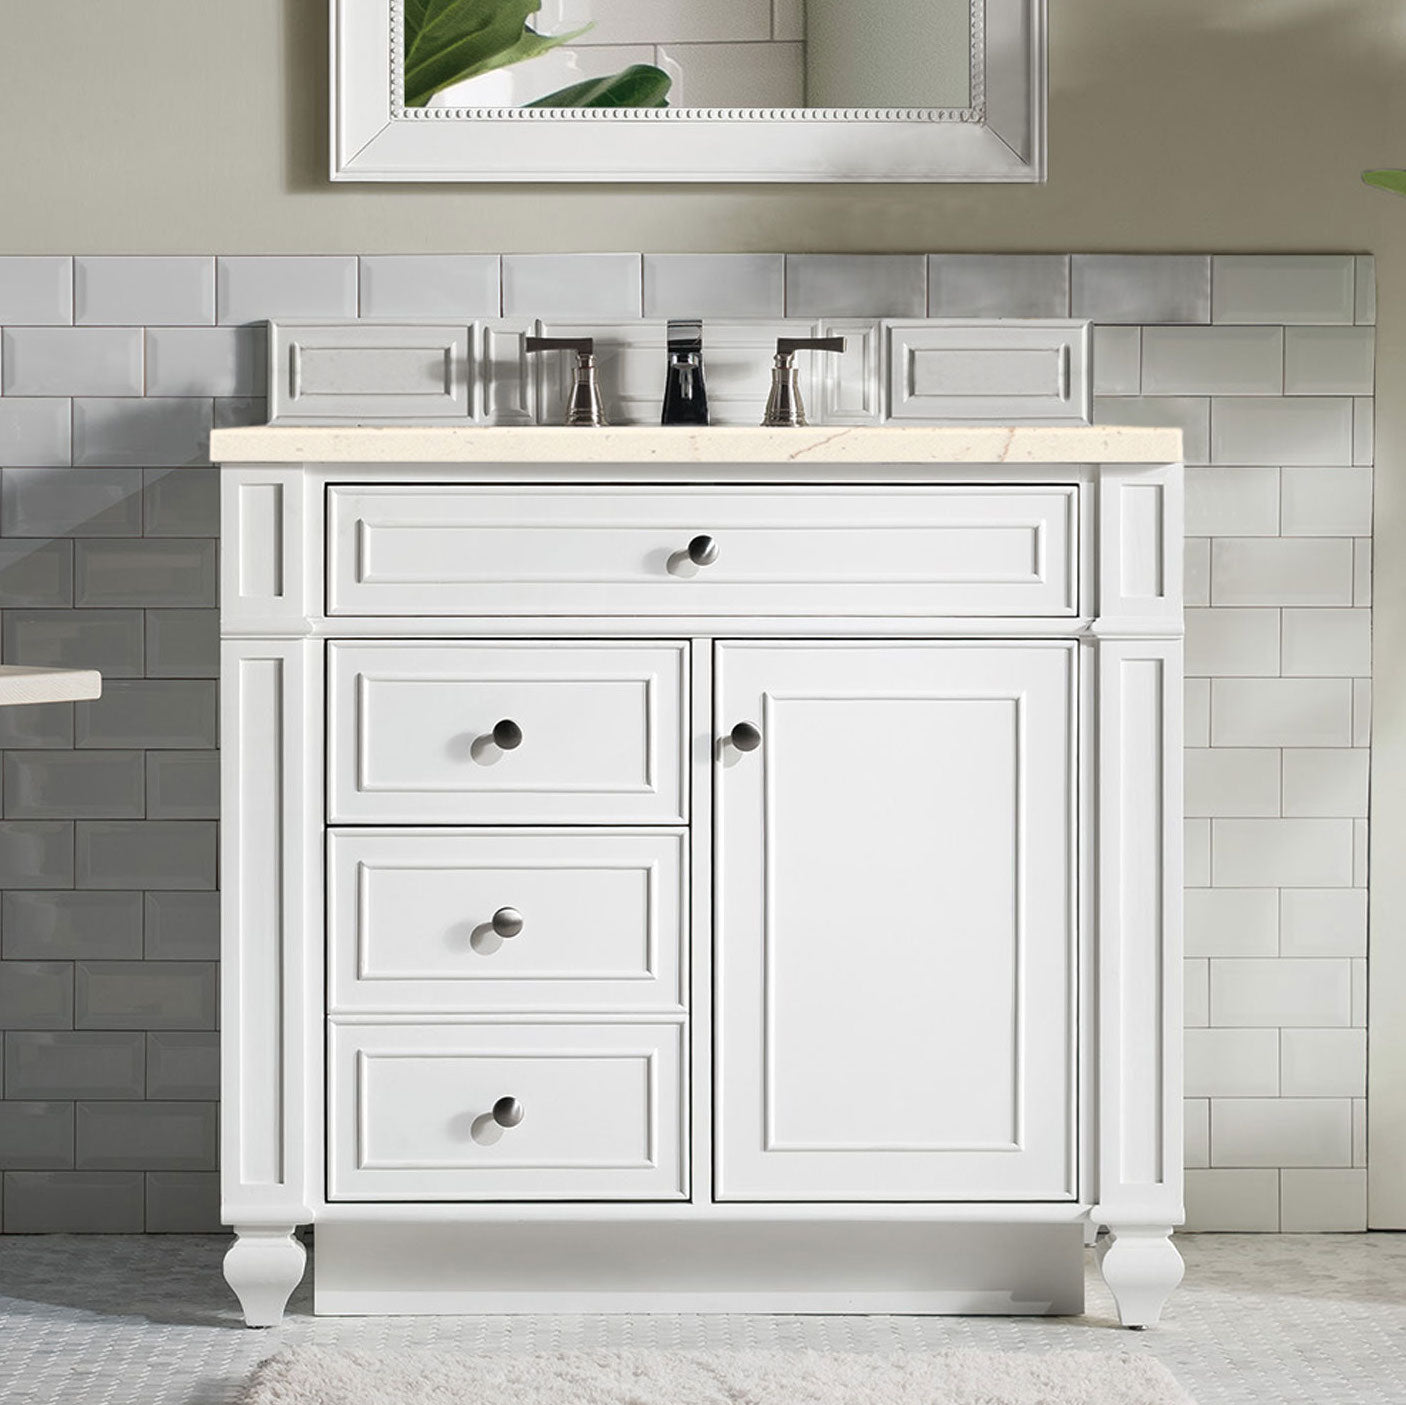 James Martin Vanities Bristol Collection 36 in. Single Vanity in Bright White with Countertop Options